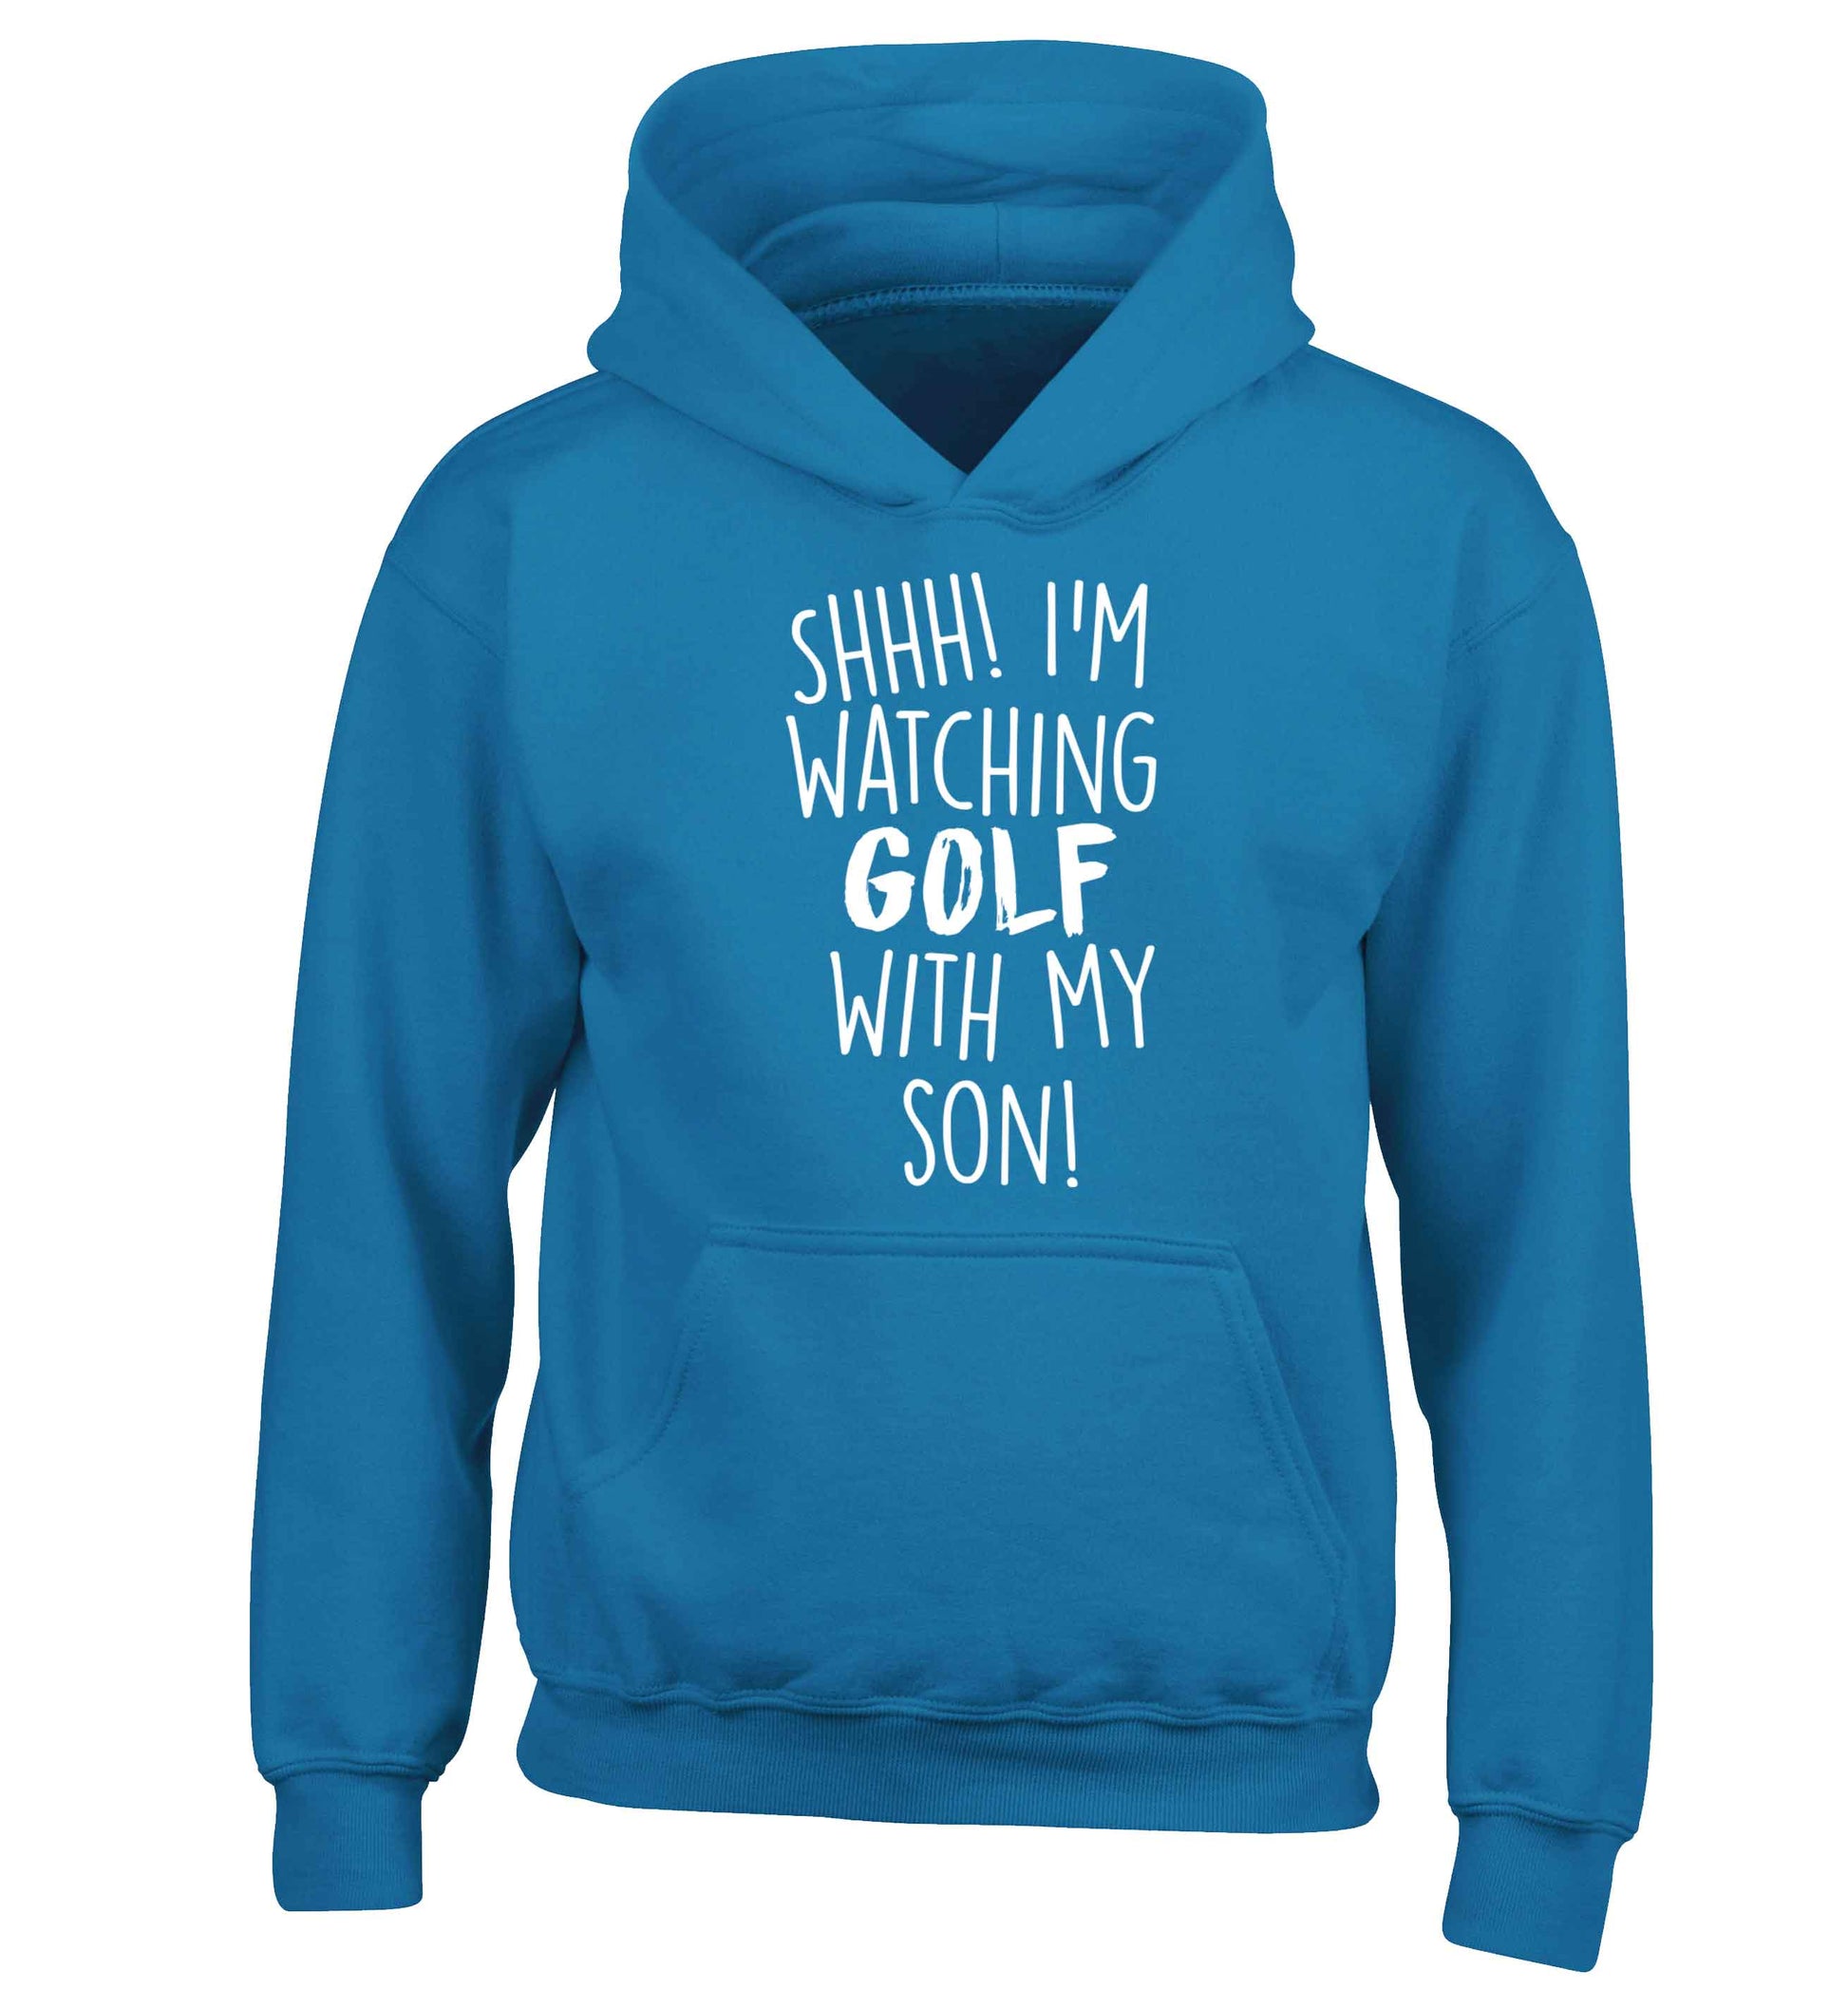 Shh I'm watching golf with my son children's blue hoodie 12-13 Years